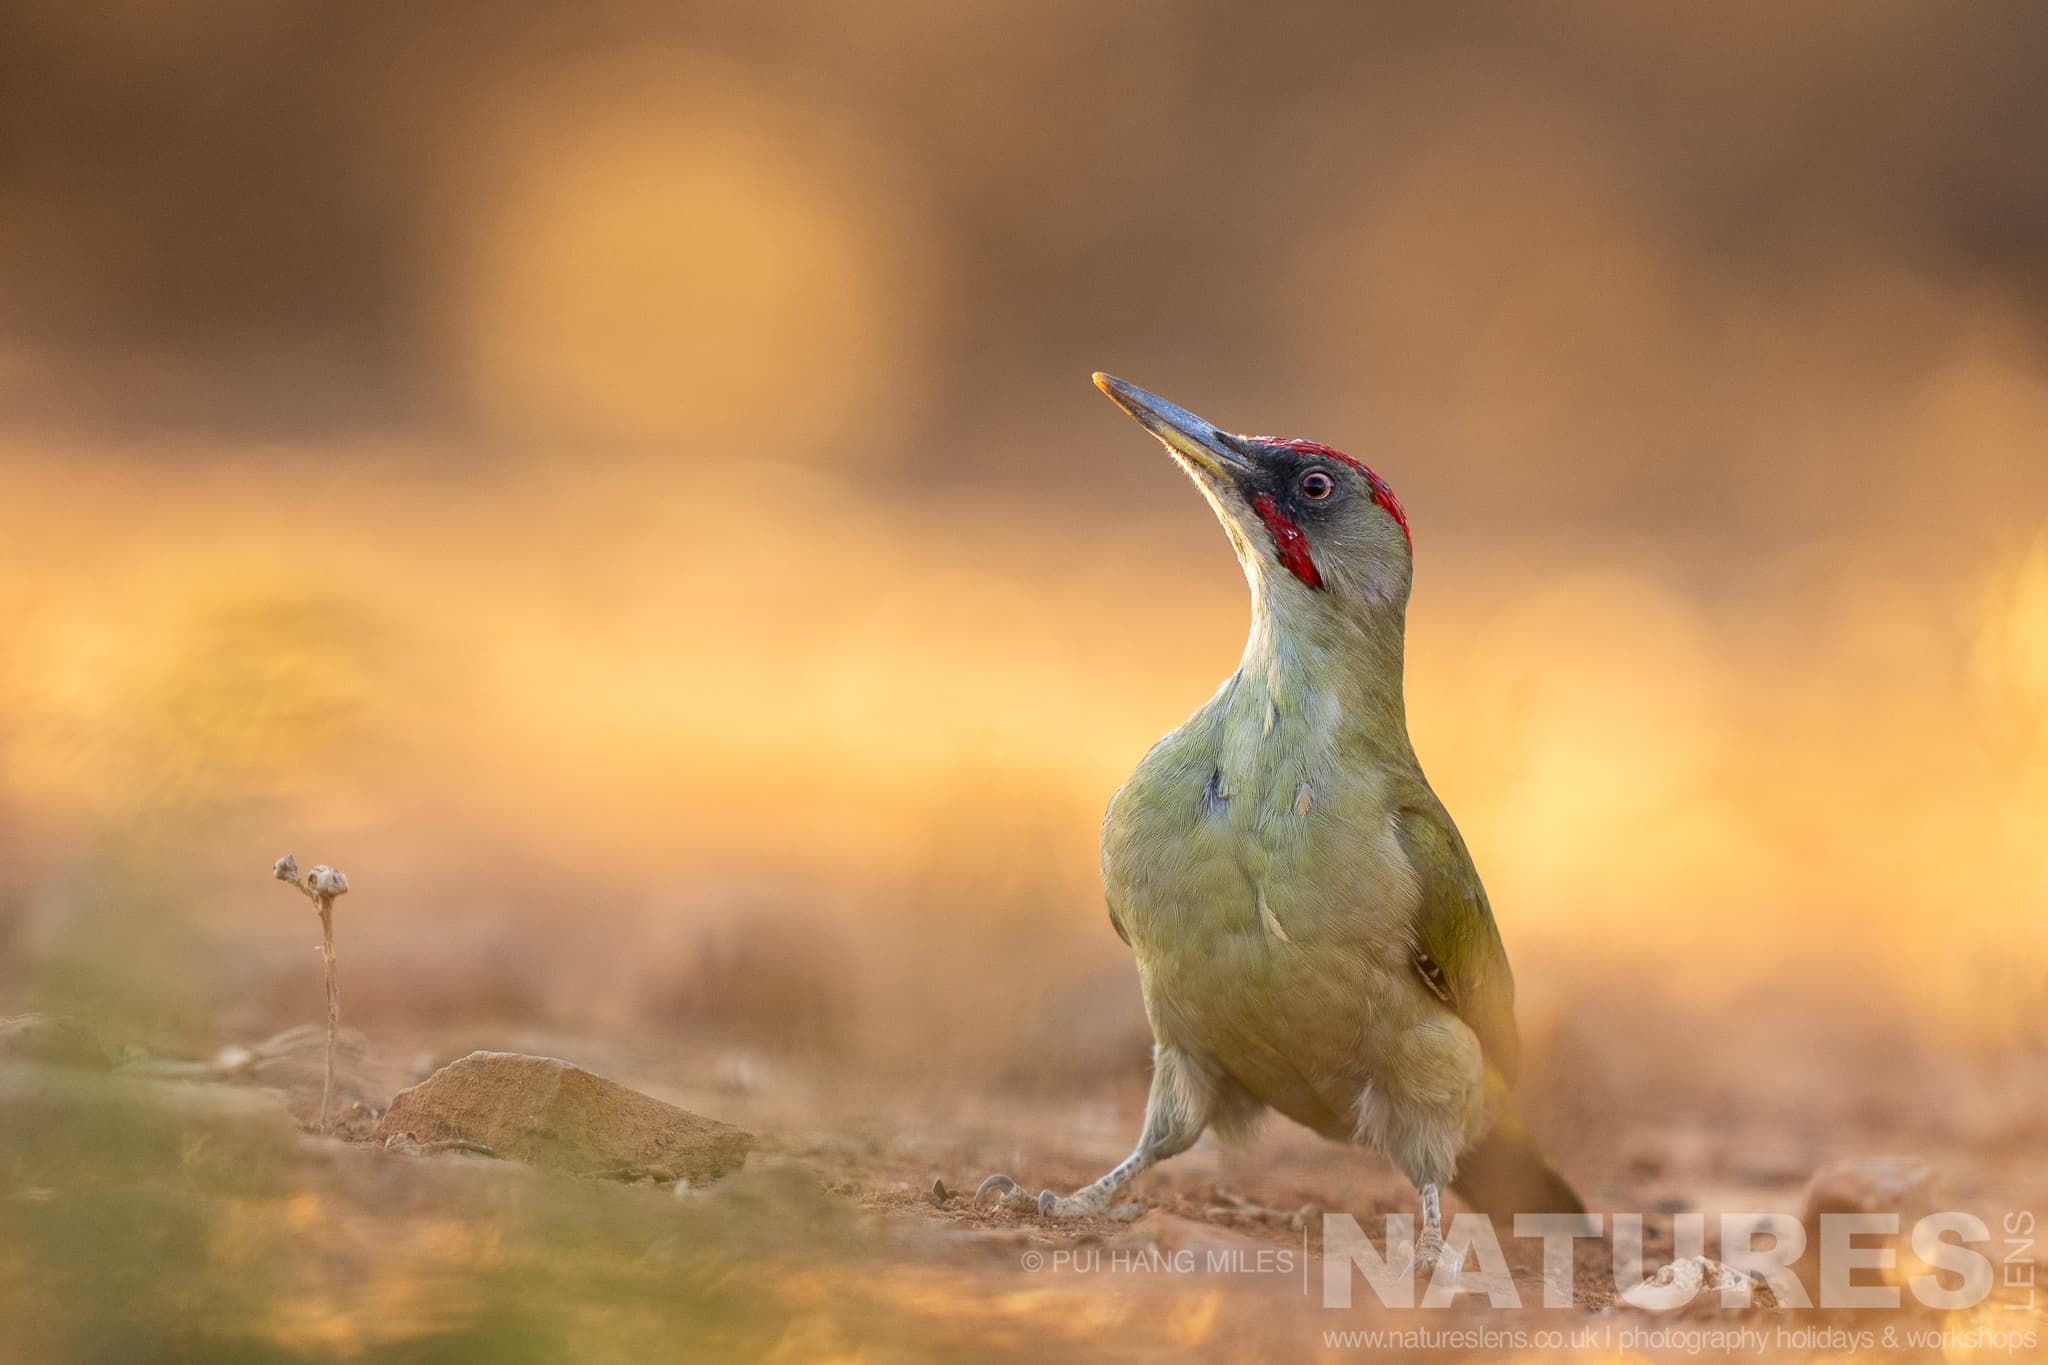 An Alert Woodpecker Photographed During One Of The Natureslens Lynx Photography Scouting Trips